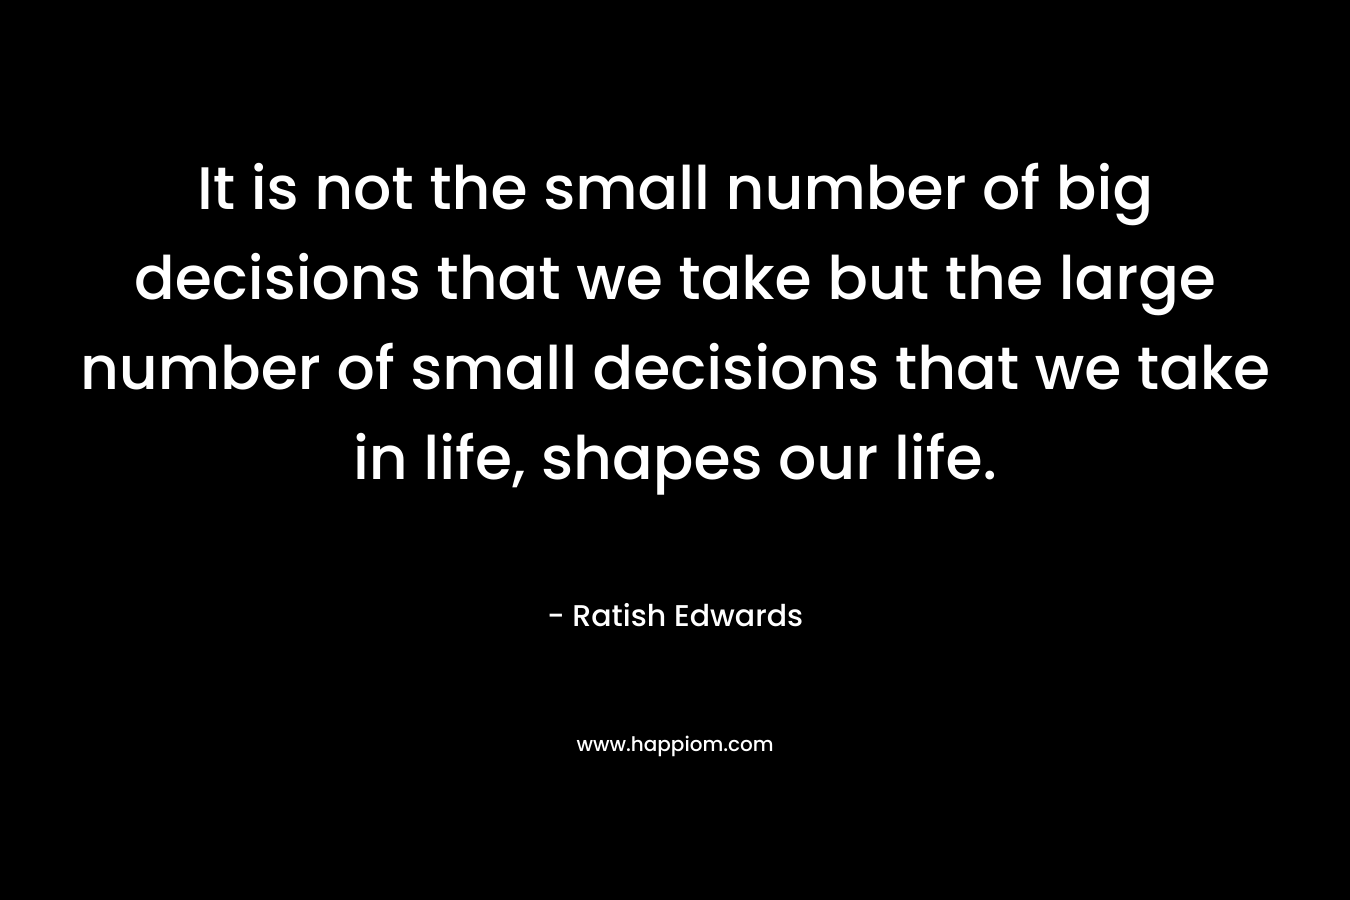 It is not the small number of big decisions that we take but the large number of small decisions that we take in life, shapes our life. – Ratish Edwards